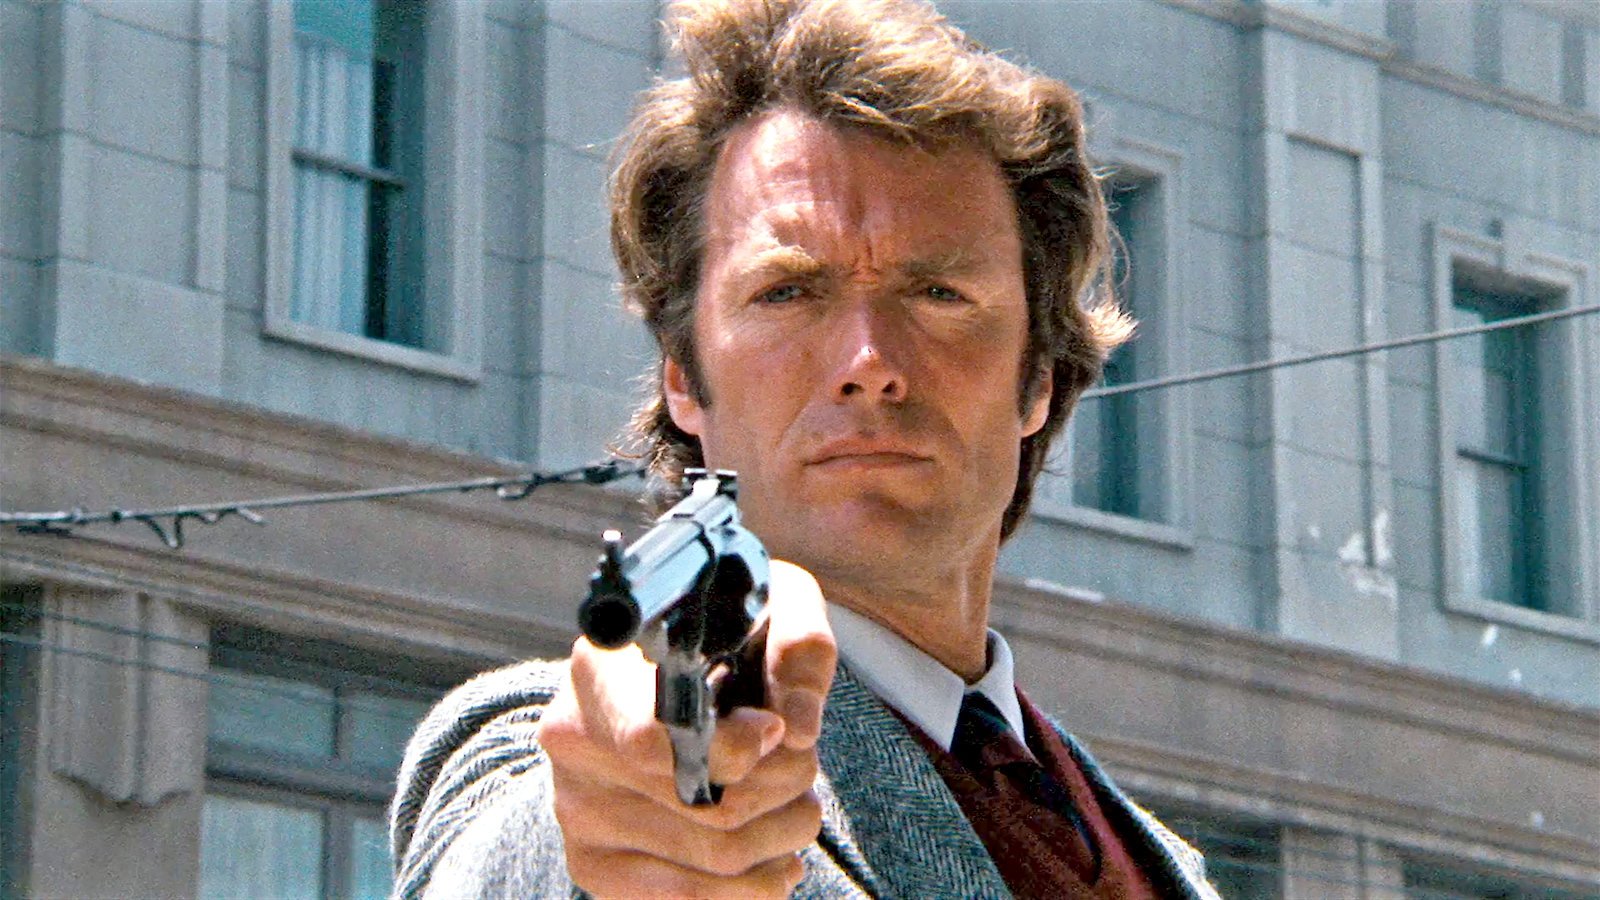 Can You Match the Movie to Its Tagline? Dirty Harry